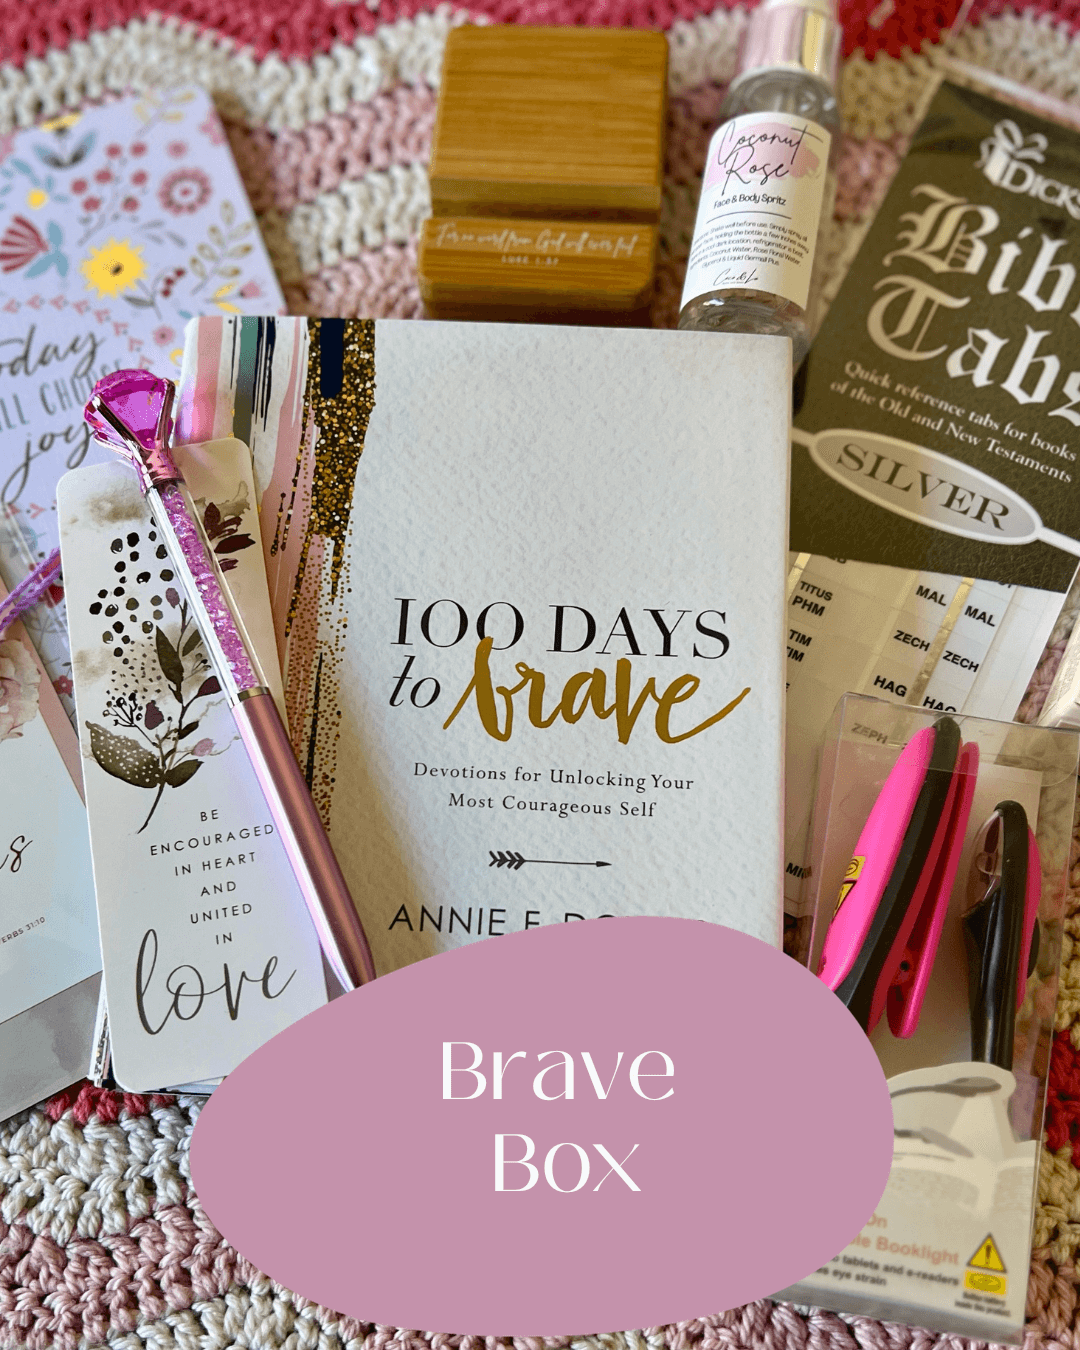 Christian Gift Boxes